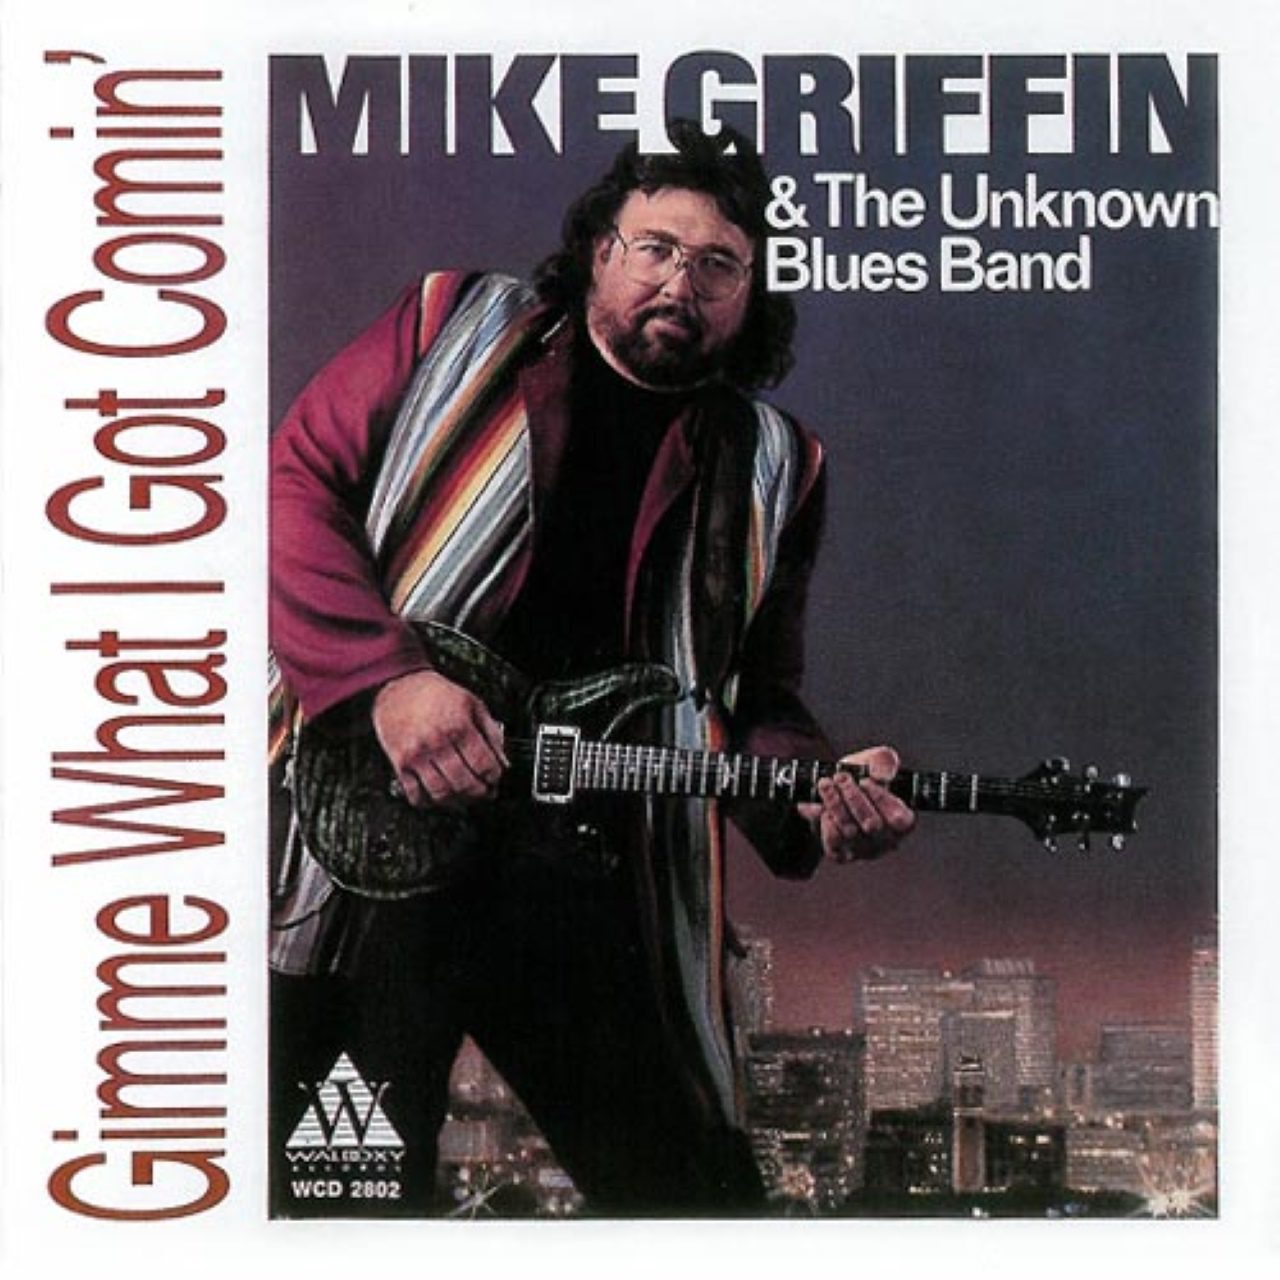 Mike Griffin & Unknown Blues Band – Gimme What I Got Comin’ cover album